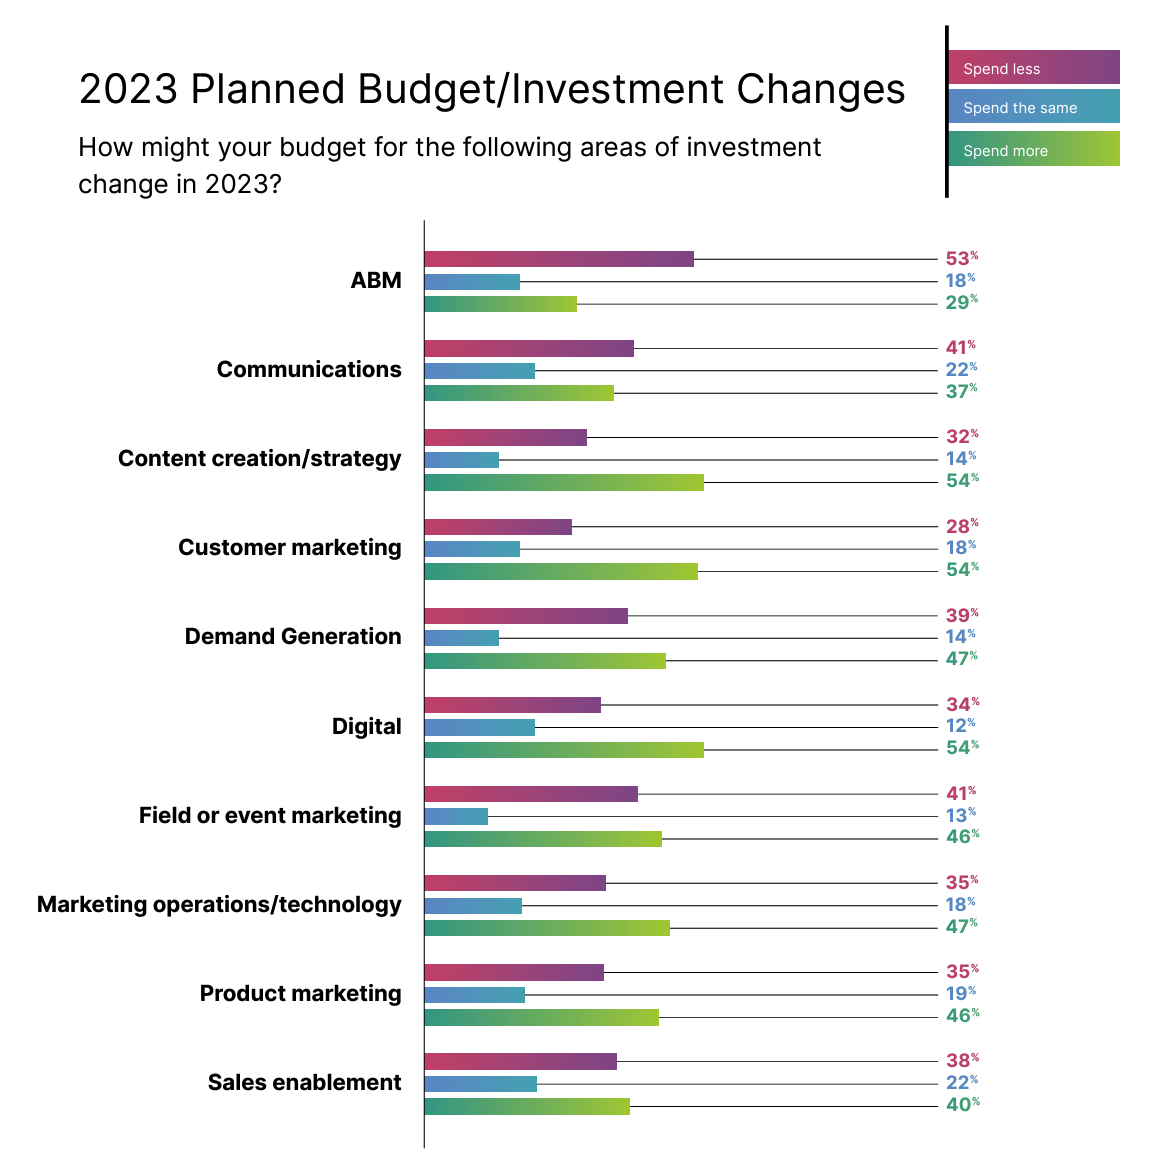 2023 Planned Budget/Investment Changes